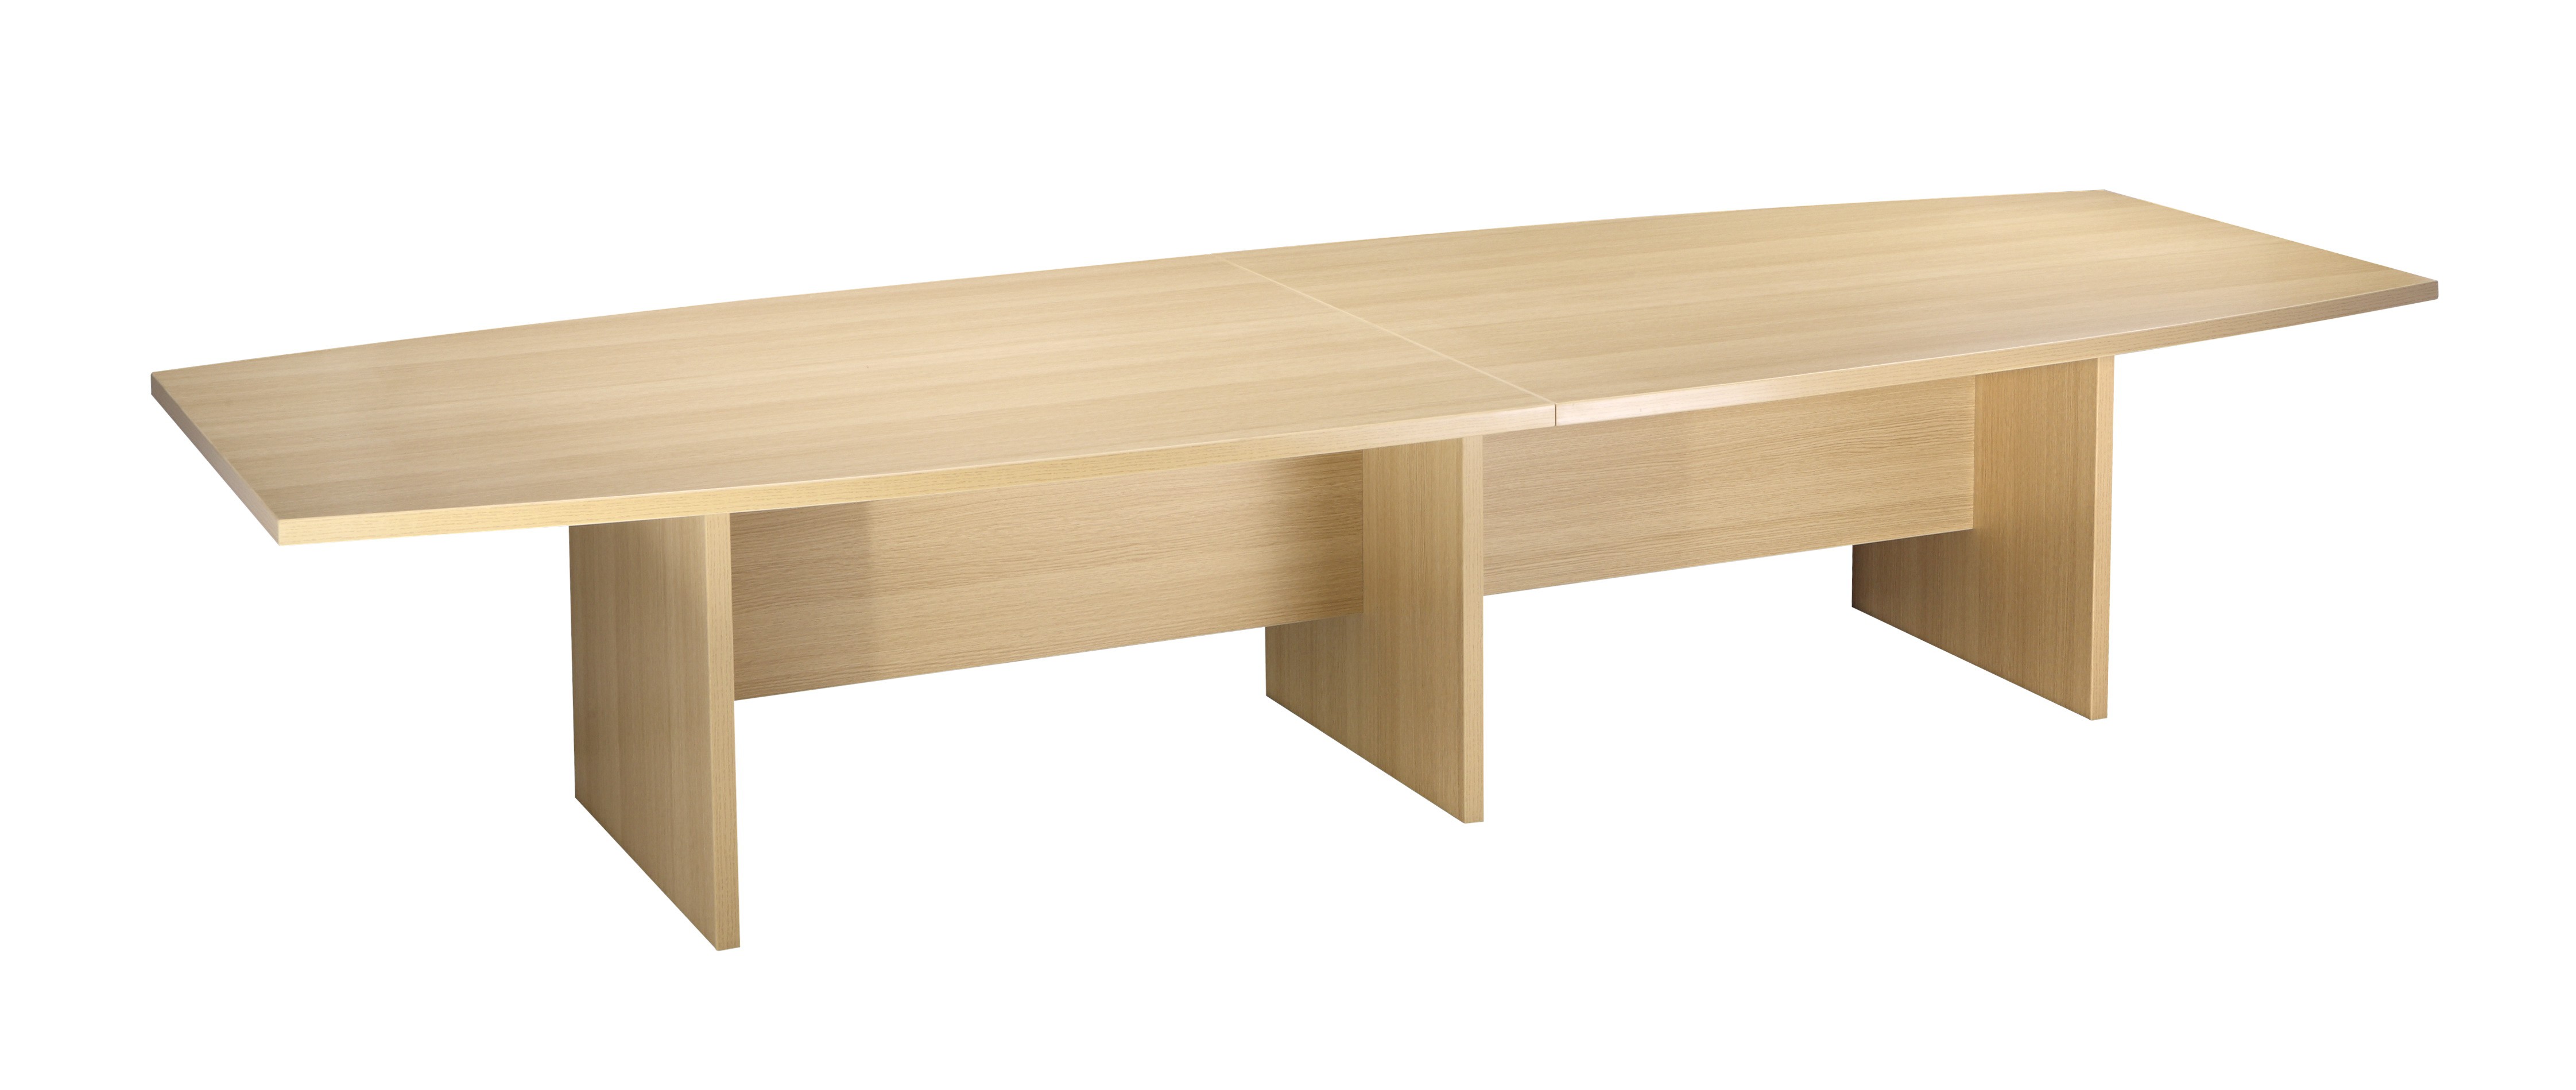 4000mm+x+1200mm+Boat+Shaped+Table+with+36mm+top%2C+Light+Oak+